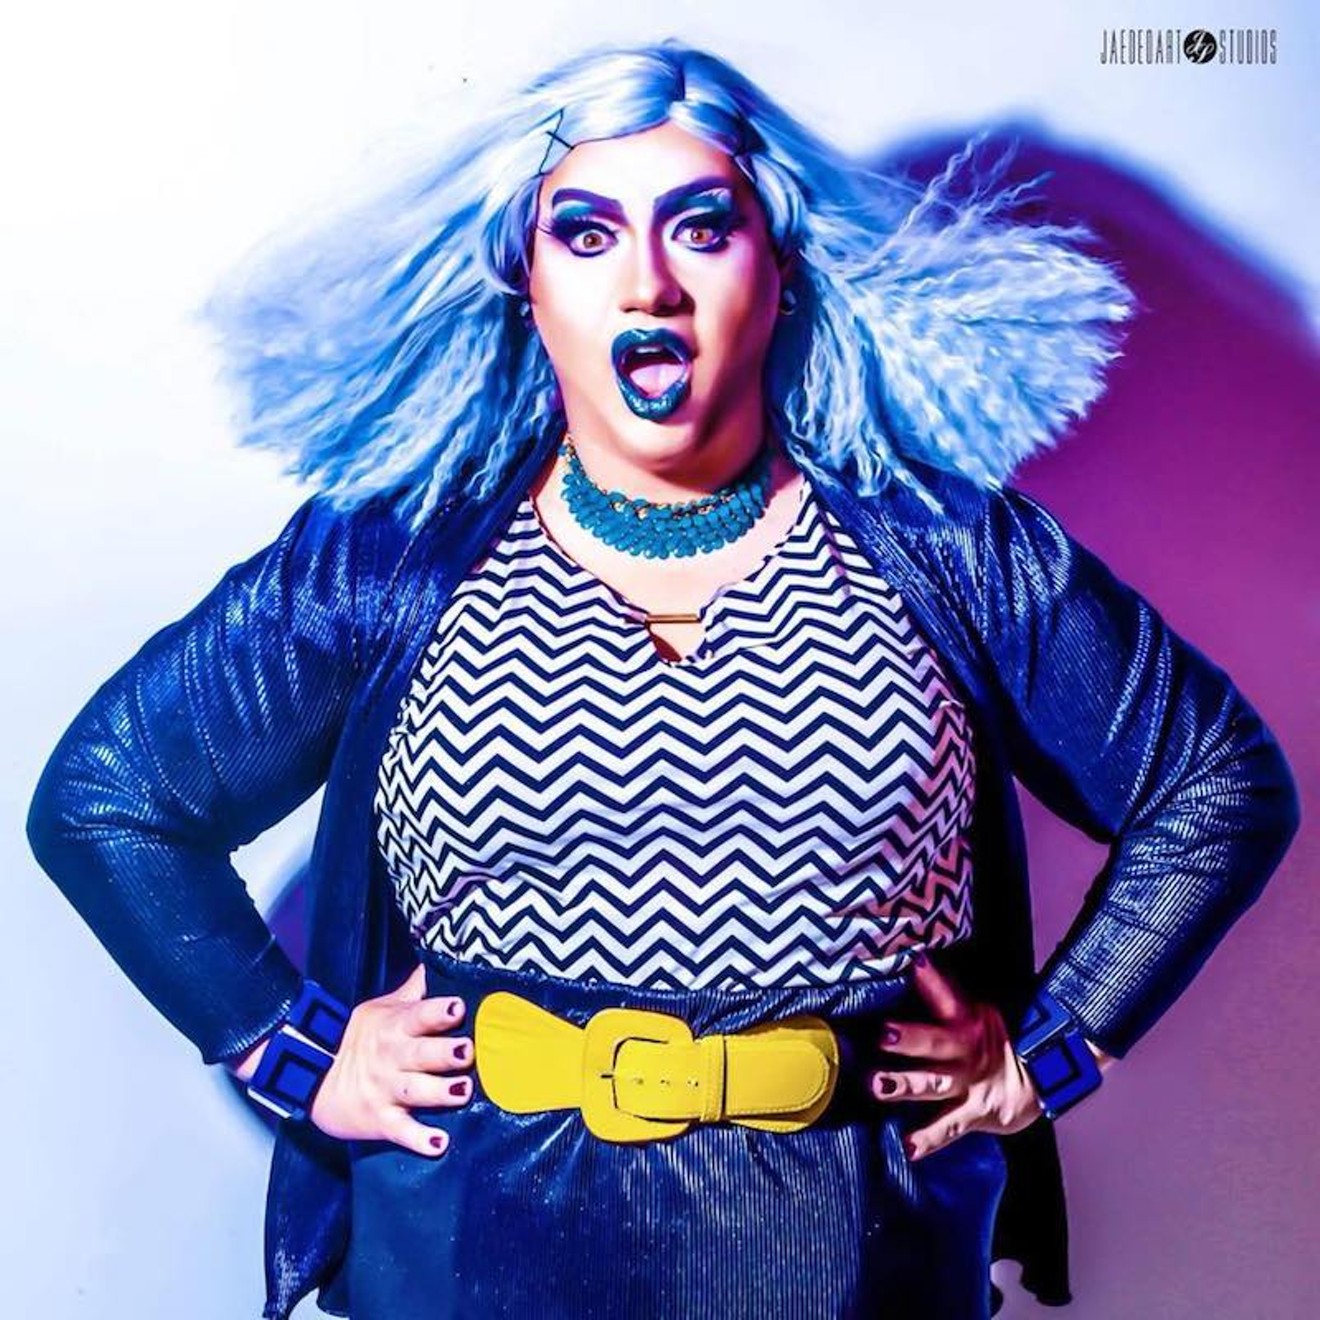 Vivica Galactica co-hosts the Punk Rock Drag Show at Ratio Beerworks on Friday, June 8.